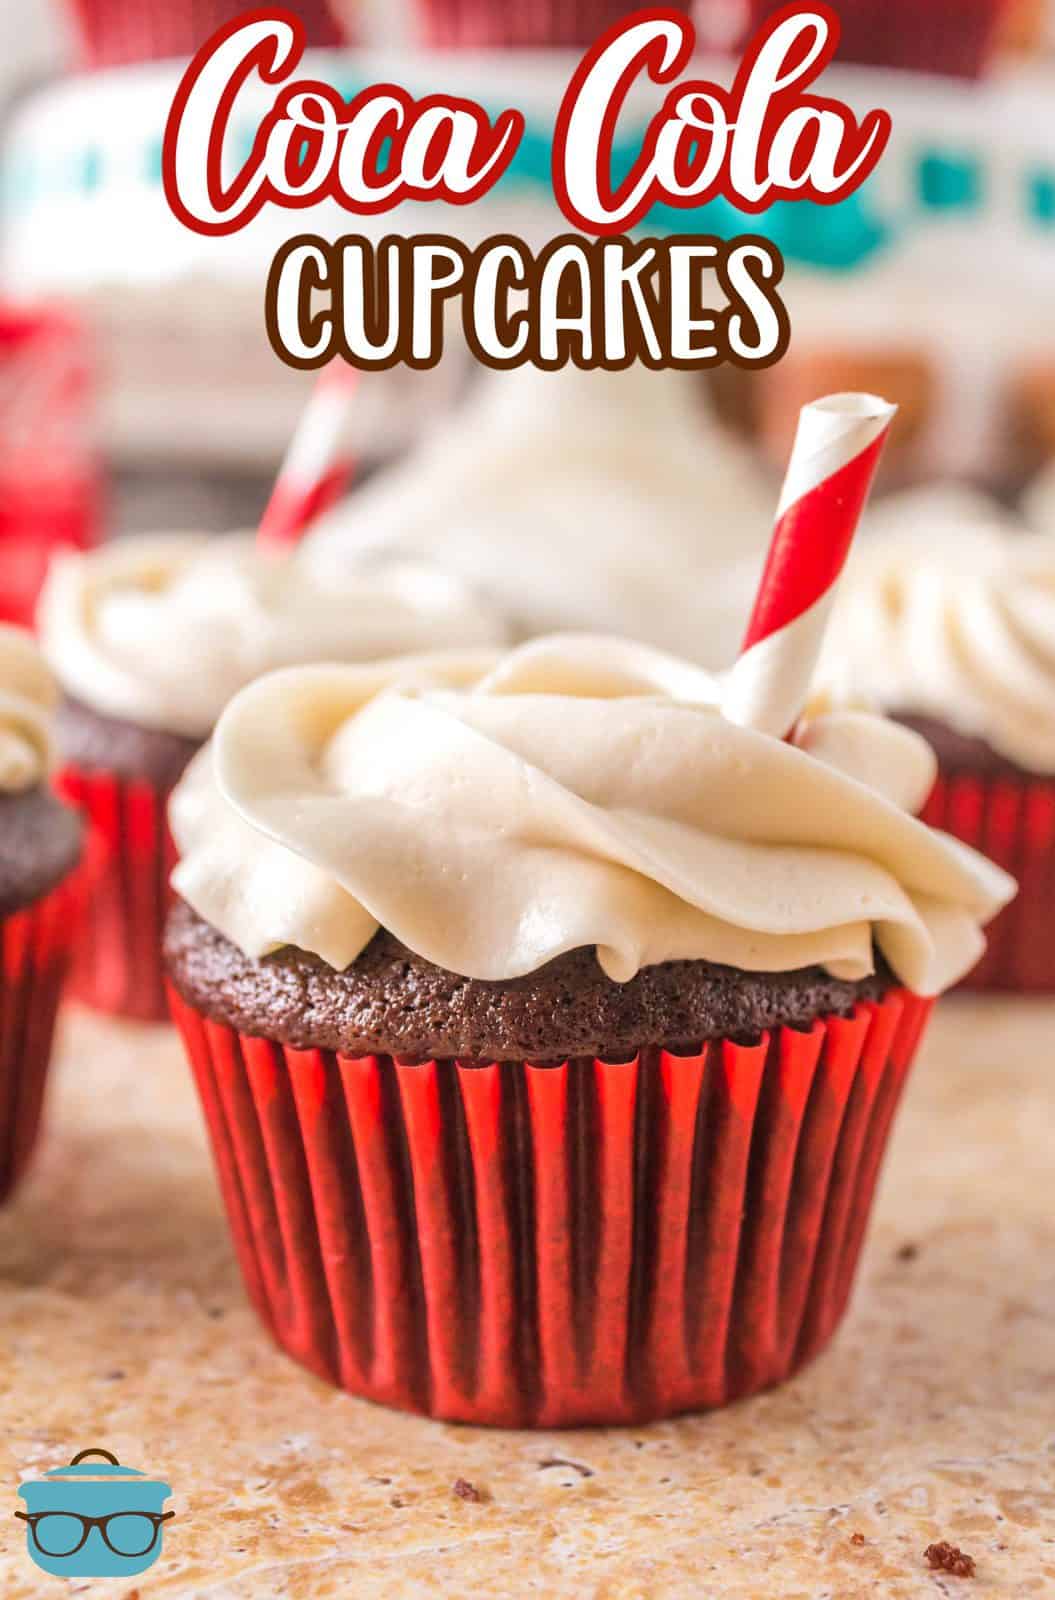 Pinterest image of Coca Cola Cupcakes with straws as decoration.